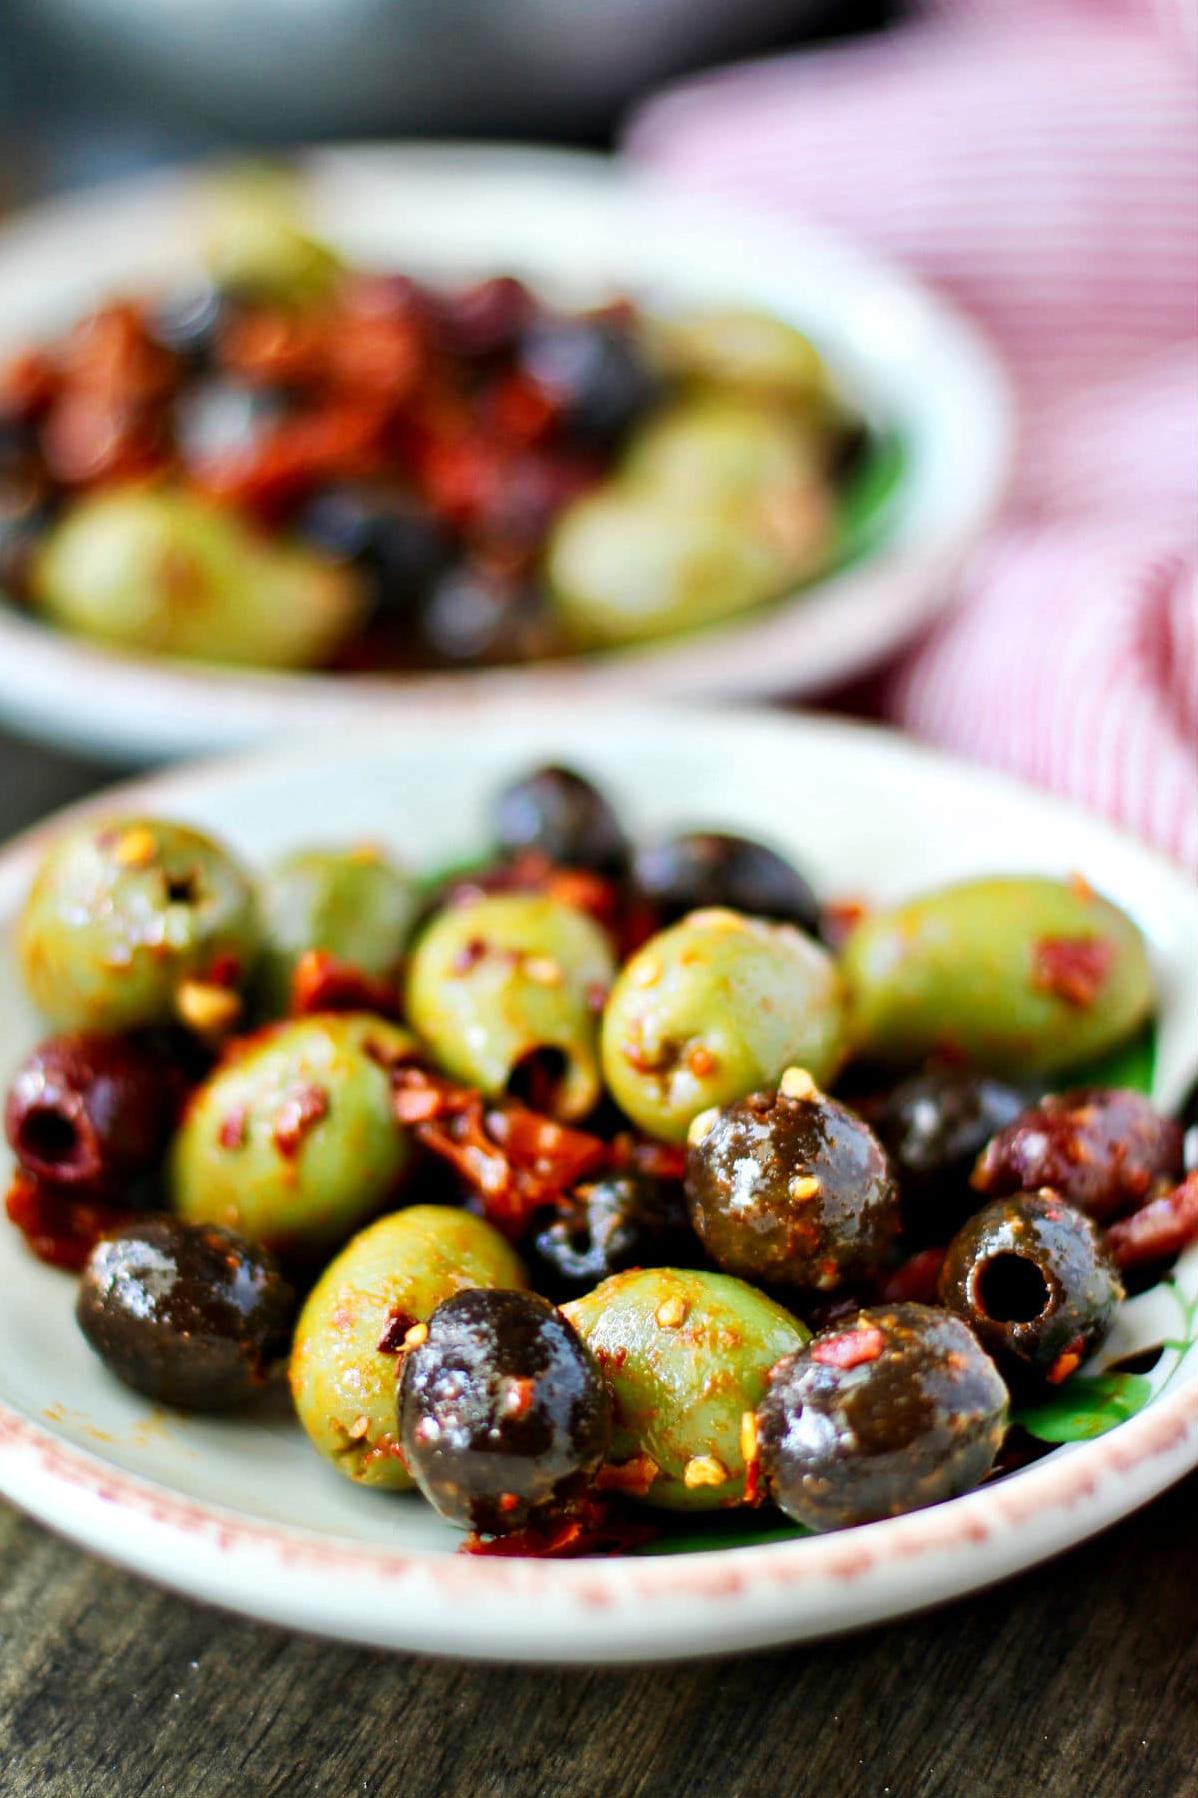  These olives are the perfect addition to any charcuterie board